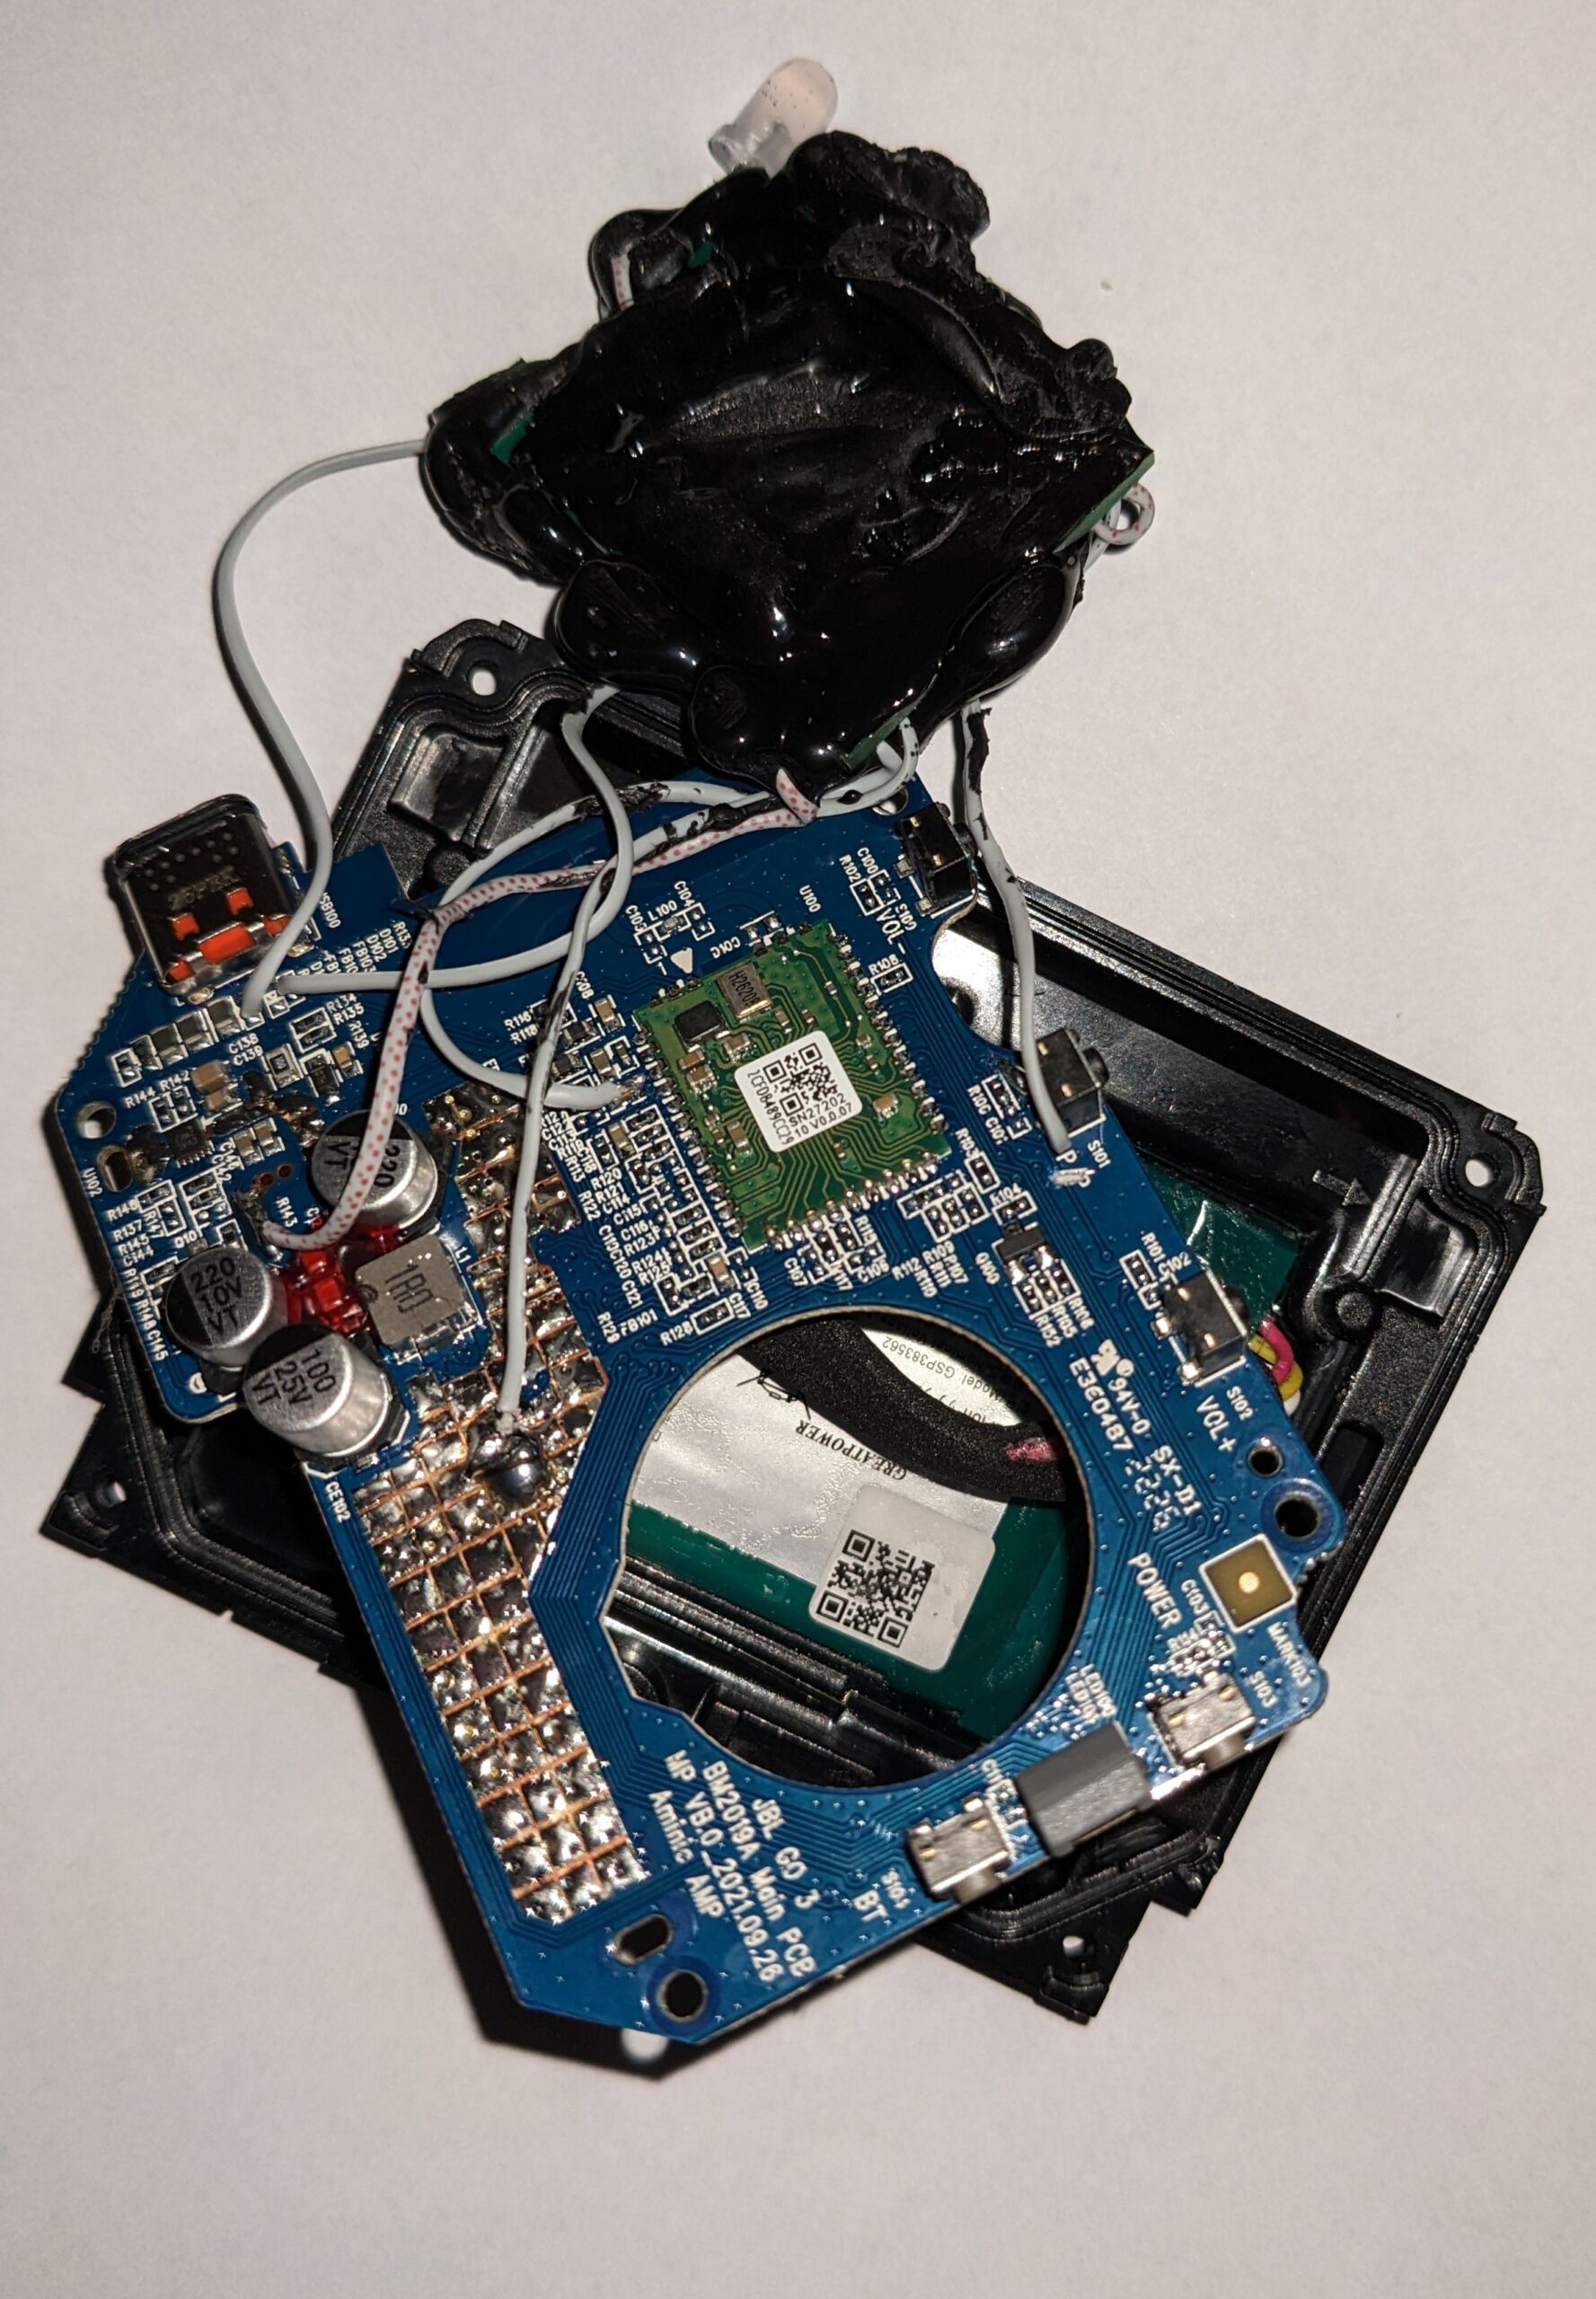 CAN injector chips attached to a resin globe glued to the JBL circuit board.